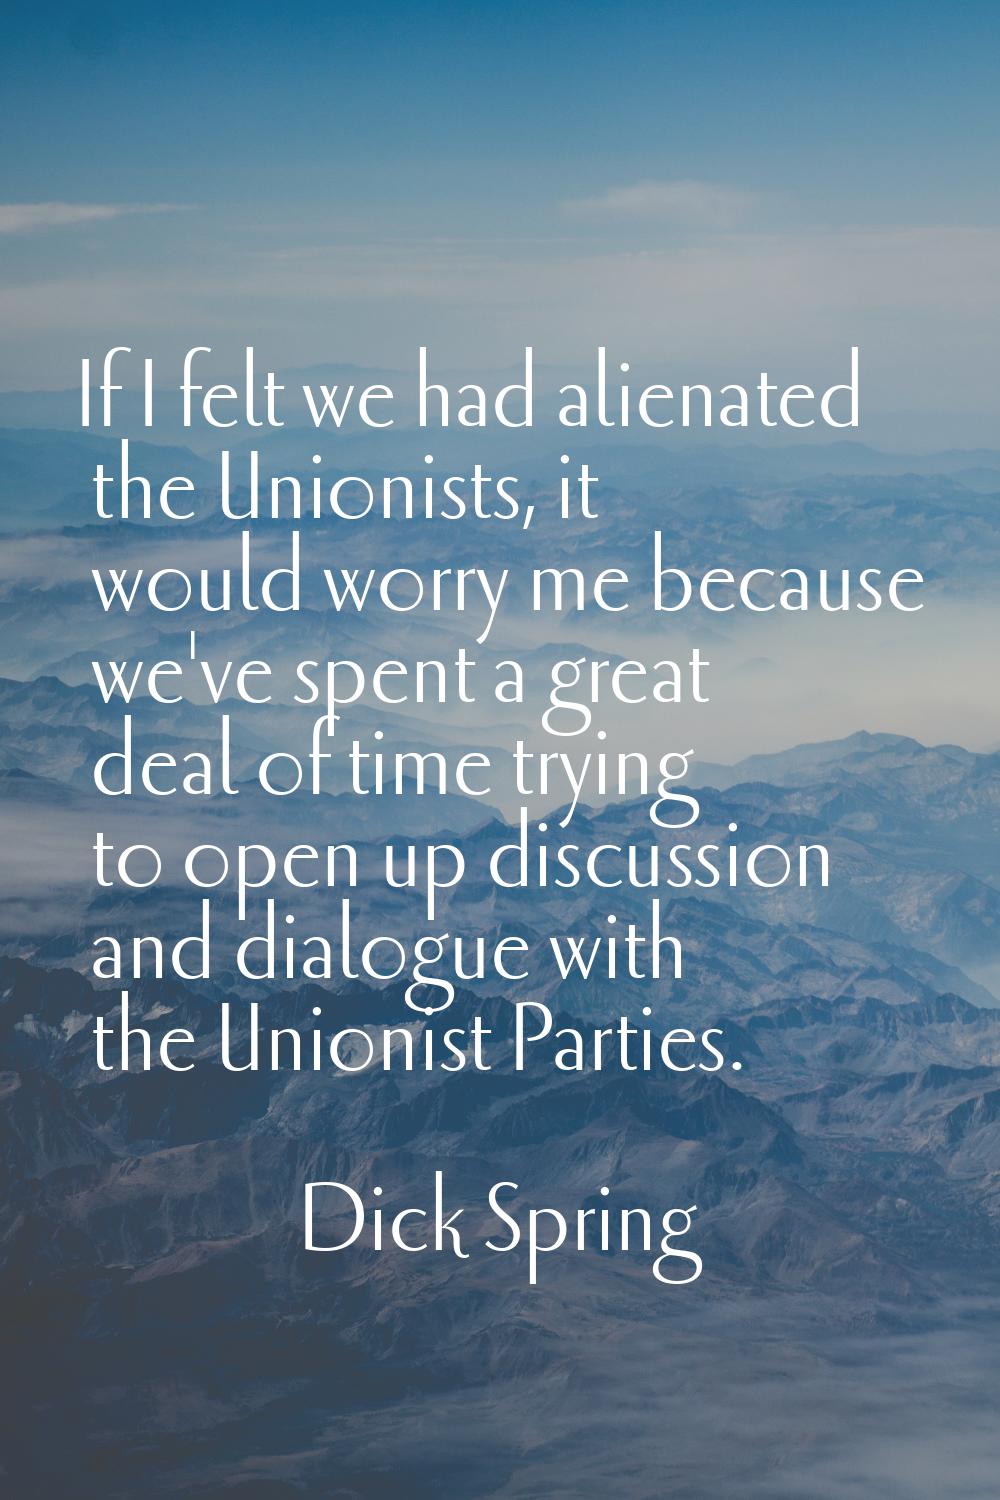 If I felt we had alienated the Unionists, it would worry me because we've spent a great deal of tim